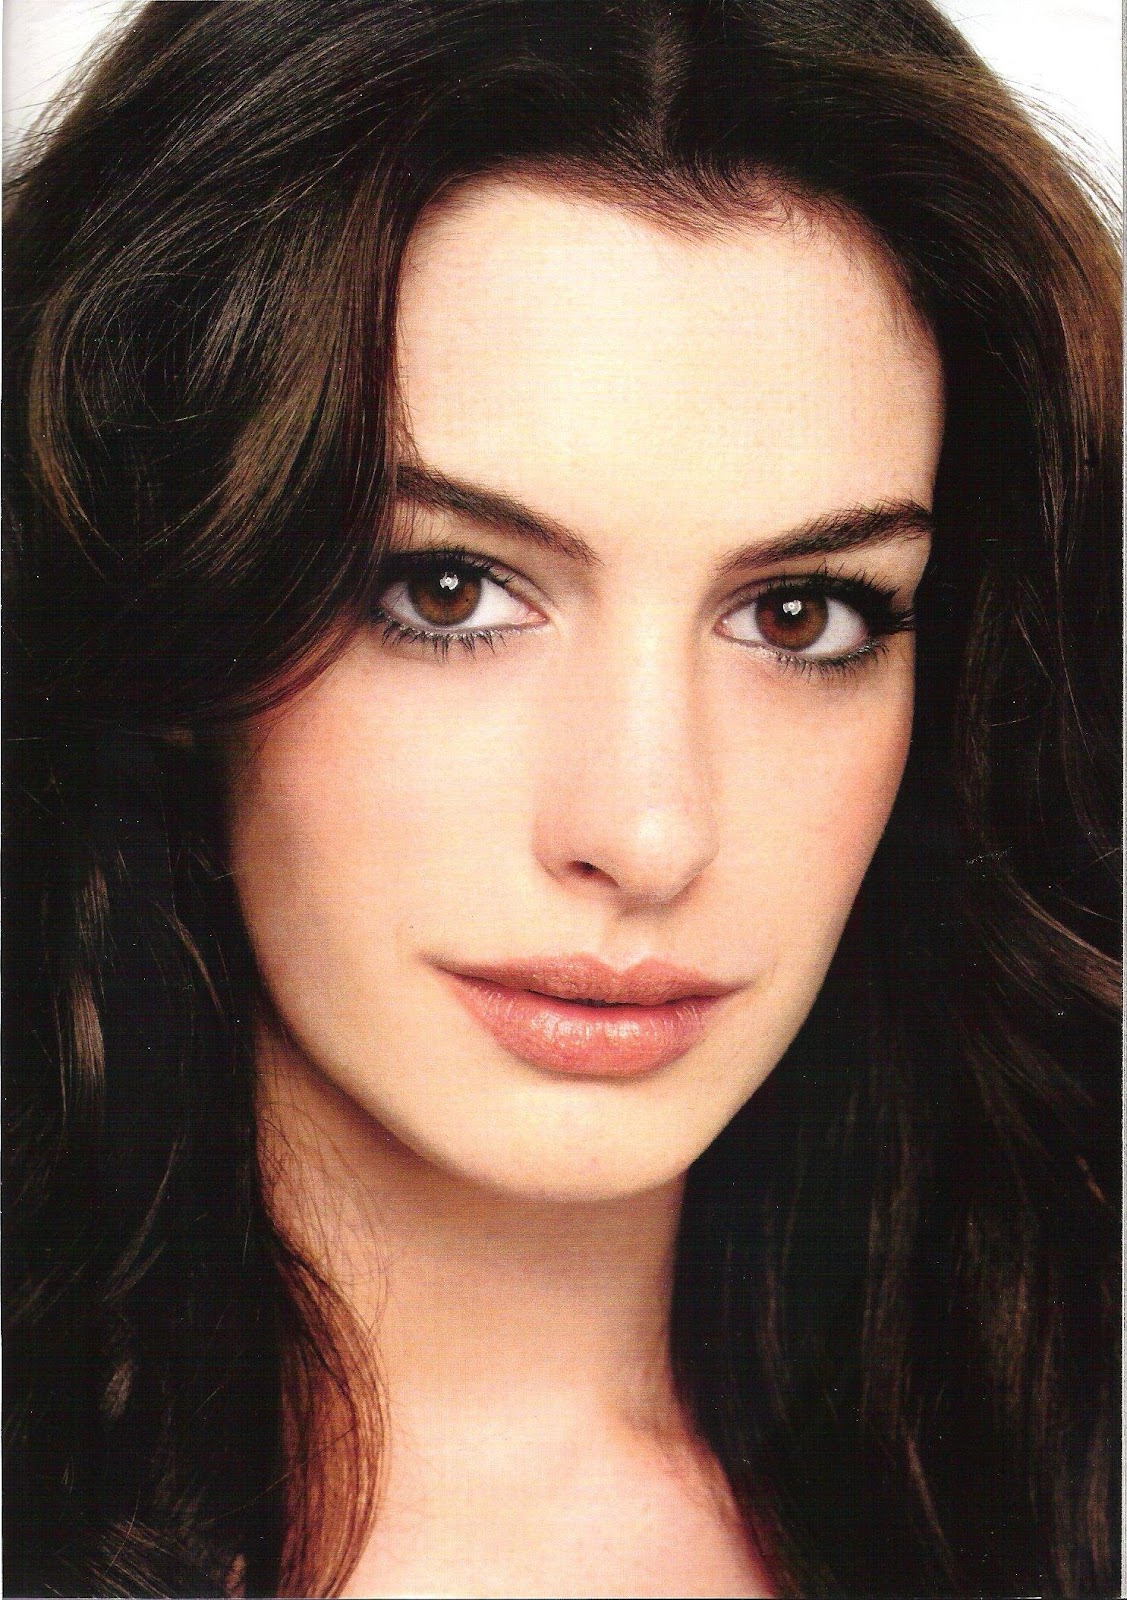 http://4.bp.blogspot.com/-LncJdjrVLw8/Ty-6TGvA8qI/AAAAAAABpRY/YqBaY9Q6hfg/s1600/Anne+Hathaway+hairstyle+pictures+(1503).jpg